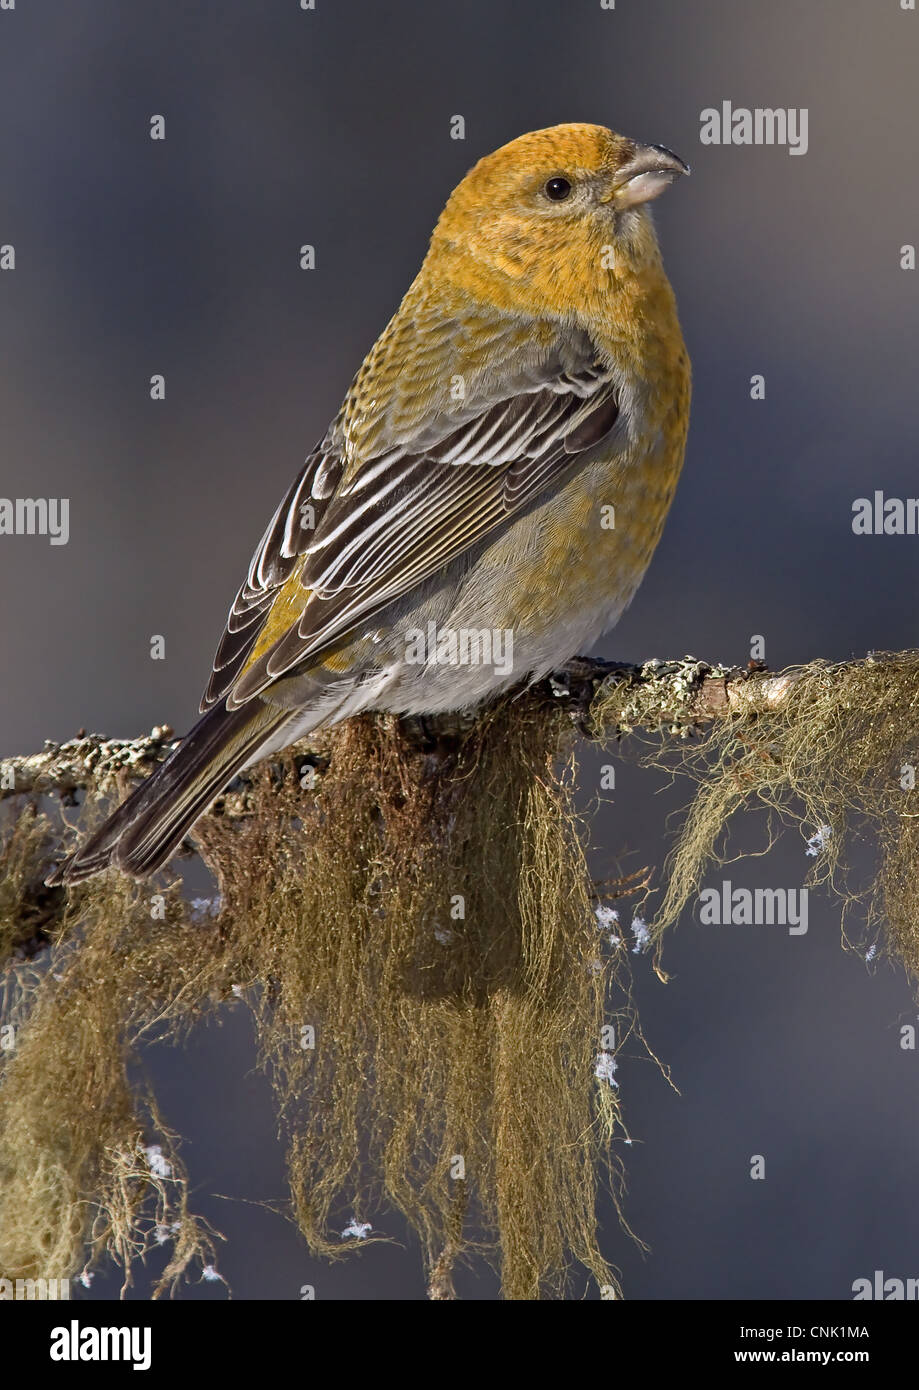 Pine Grosbeak (Pinicola enucleator) adult female, perched on lichen covered twig, Lapland, Finland, march Stock Photo